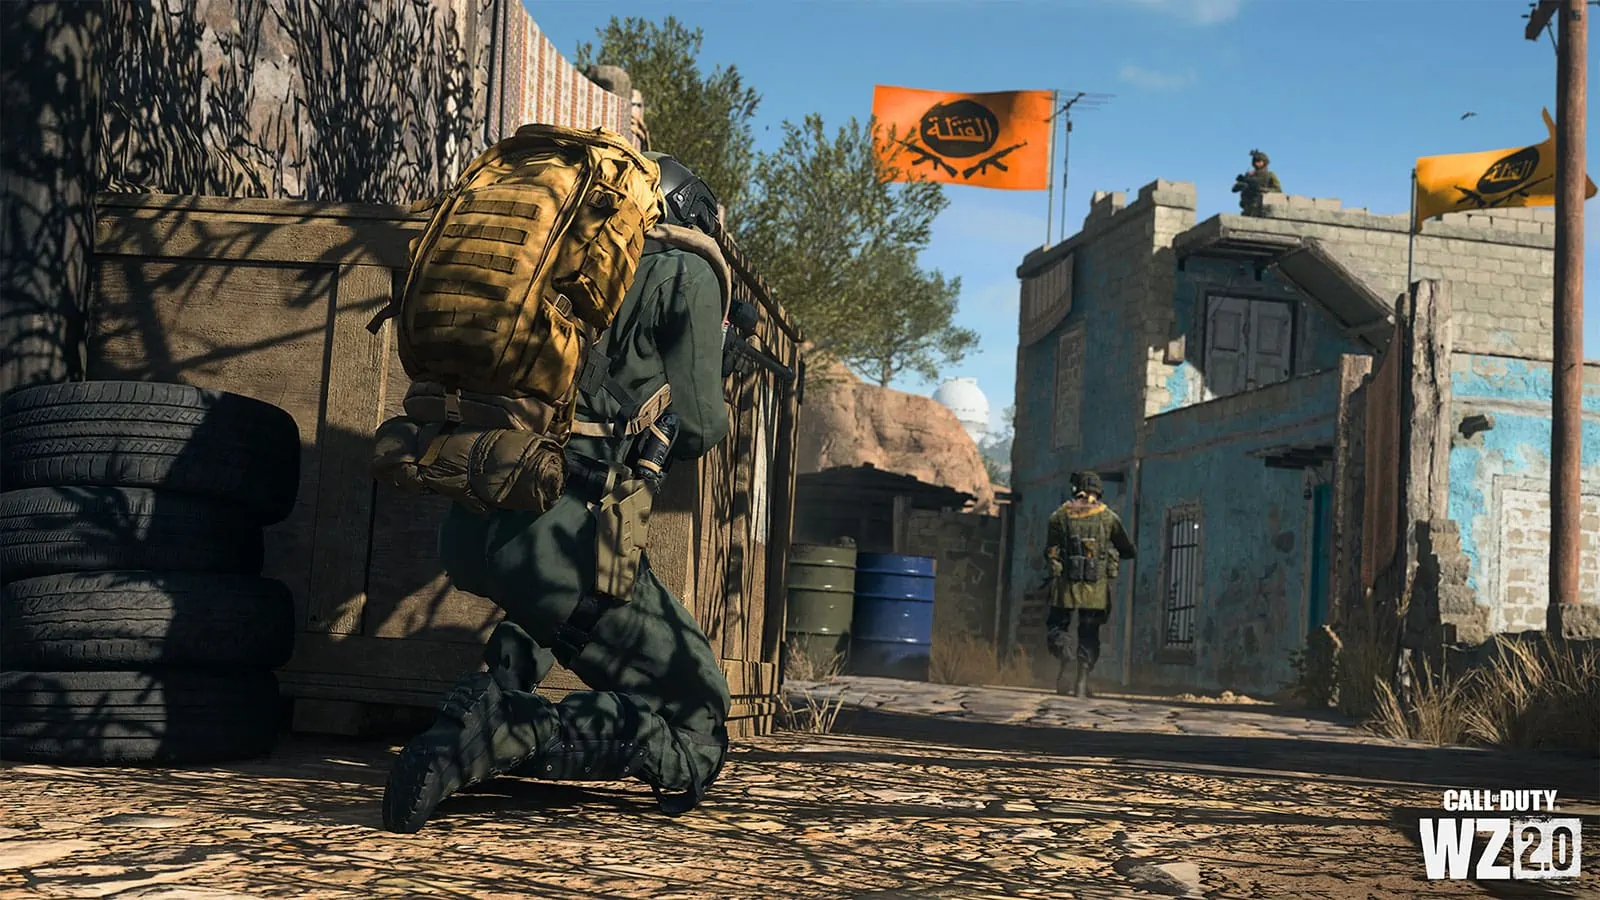 Call of Duty: Warzone 2 Community - Warzone 2.0 is labeled as